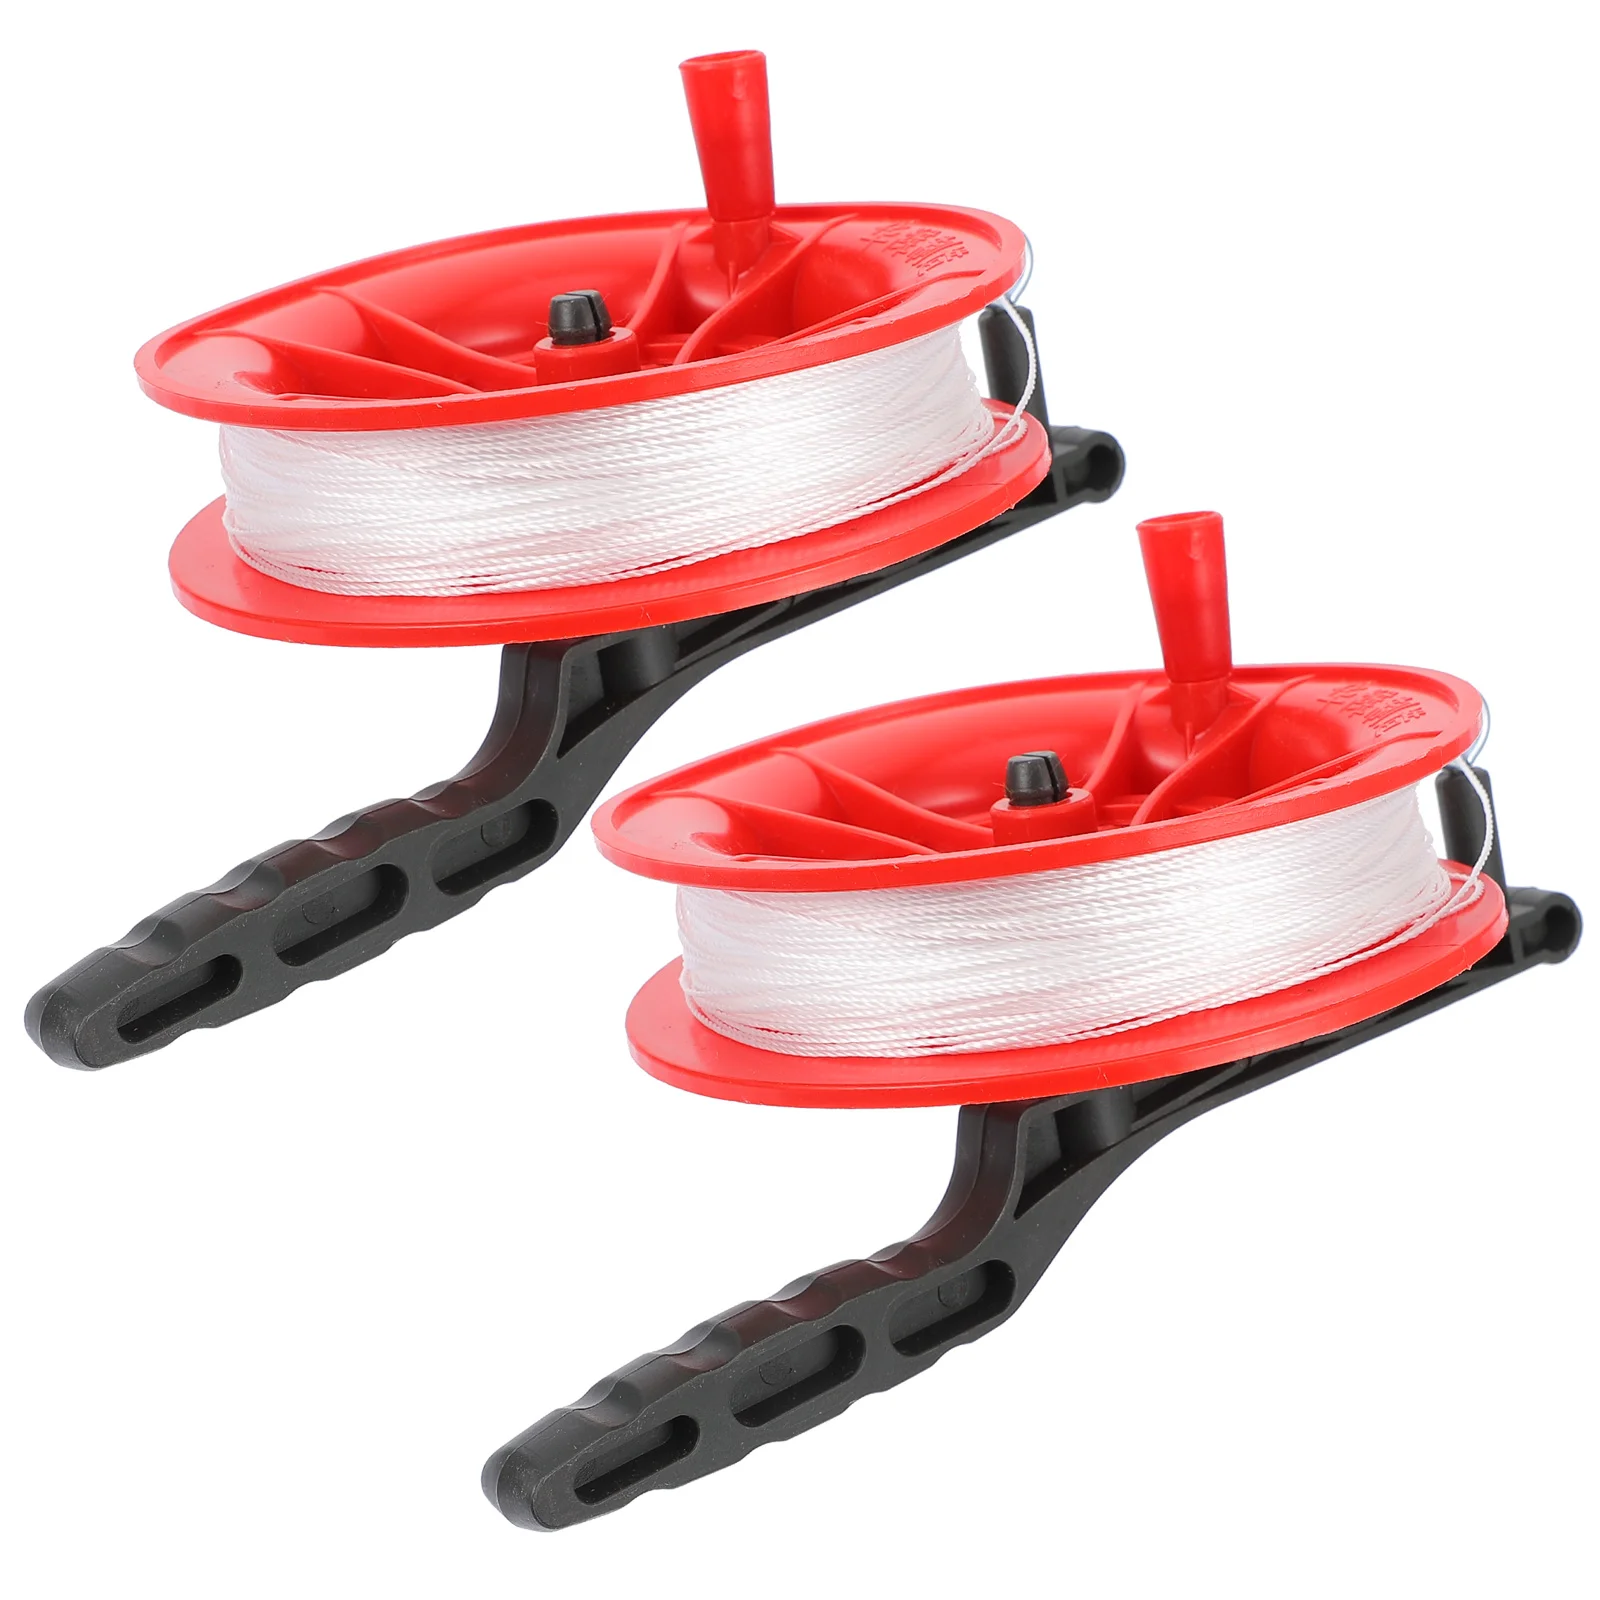 

2pcs Kite String with Reel Kite String Winder Wheel Hand Flying Reel Accessories for Kids Outdoor Game 100m Line